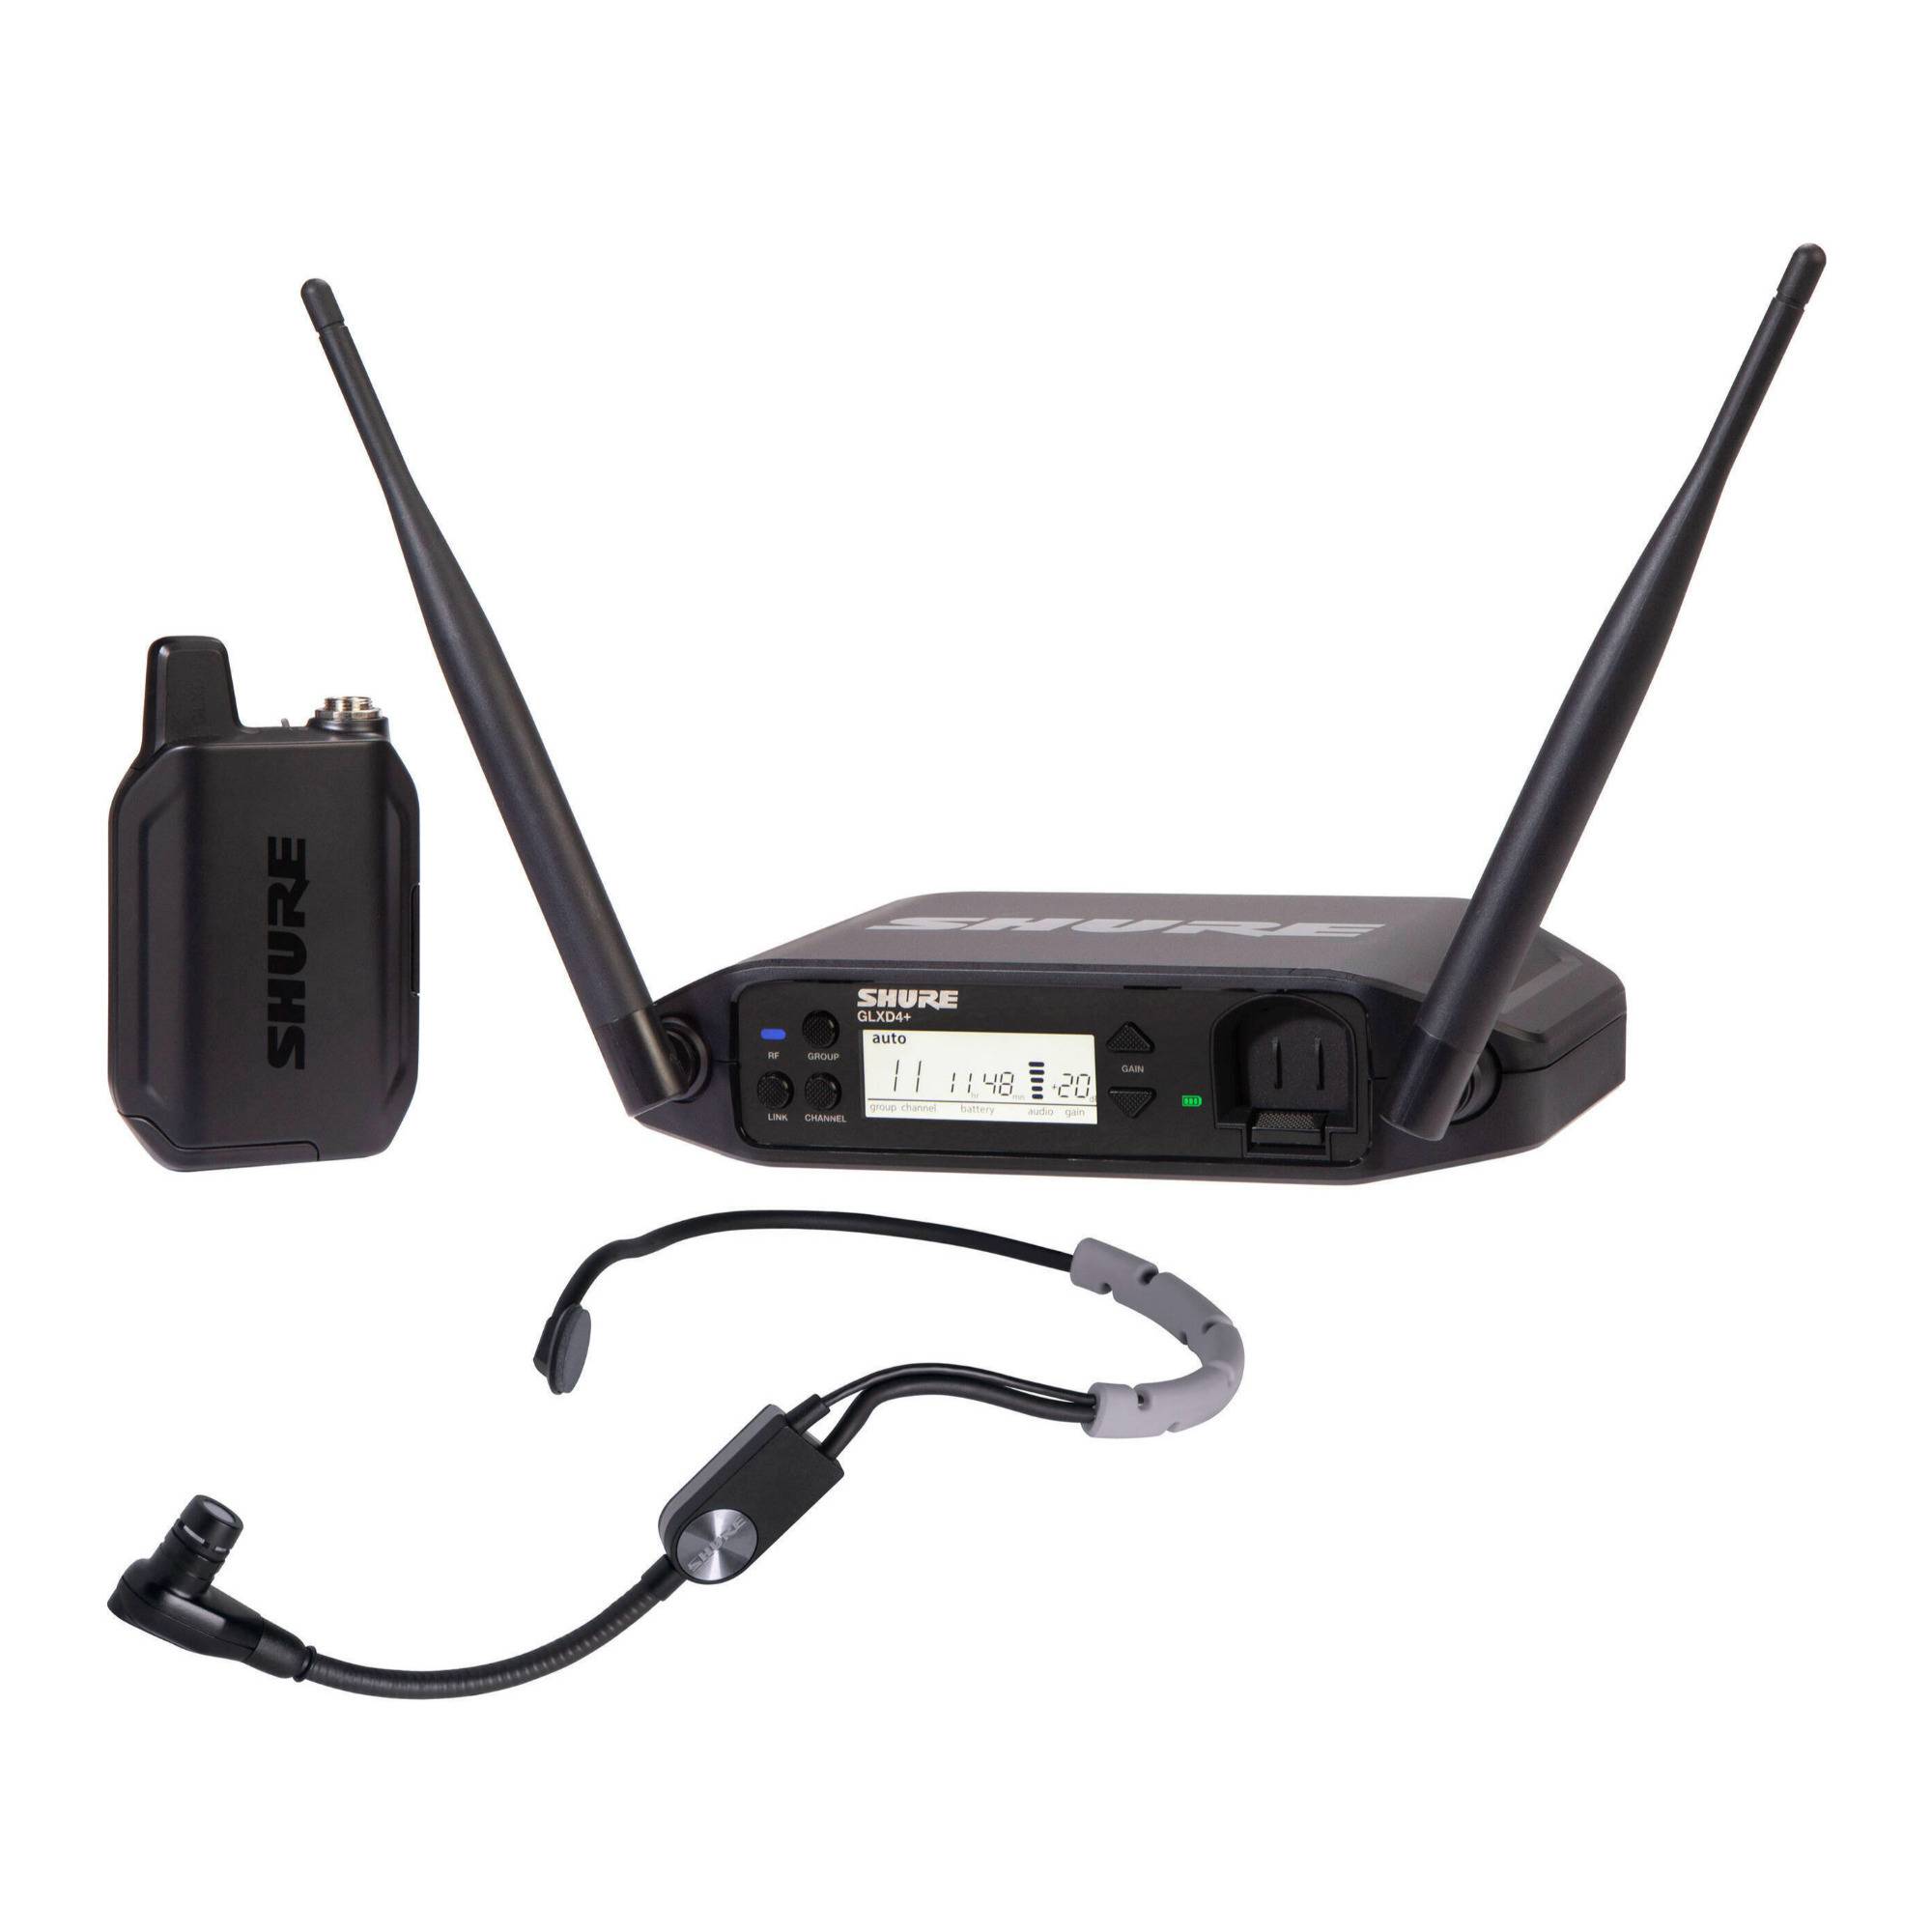 Shure GLXD14+/SM35 Z3 Frequency Band Digital Wireless Headset System with Headset Microphone (Black)